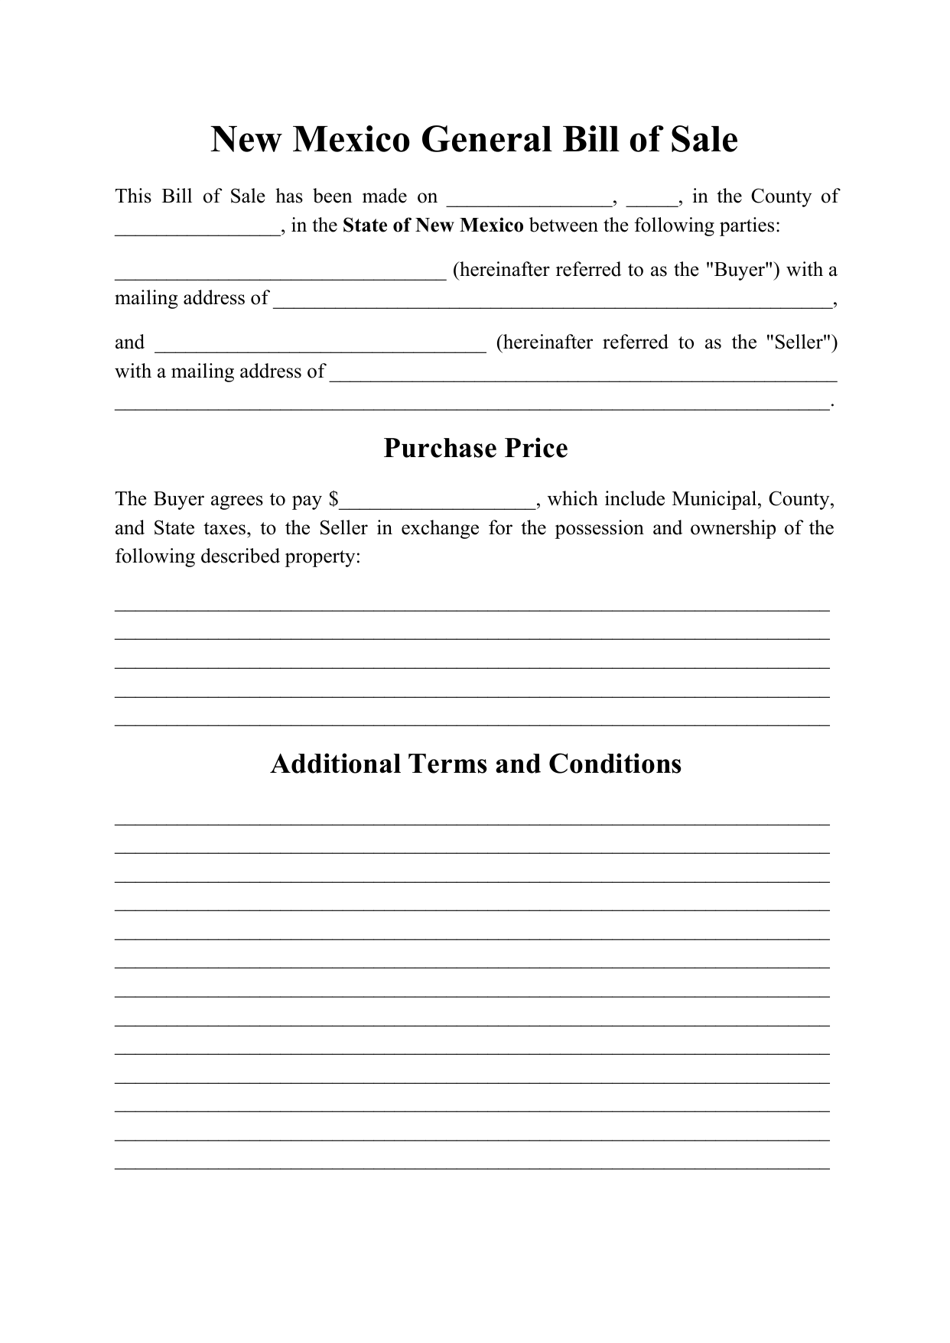 Generic Bill of Sale Form - New Mexico, Page 1